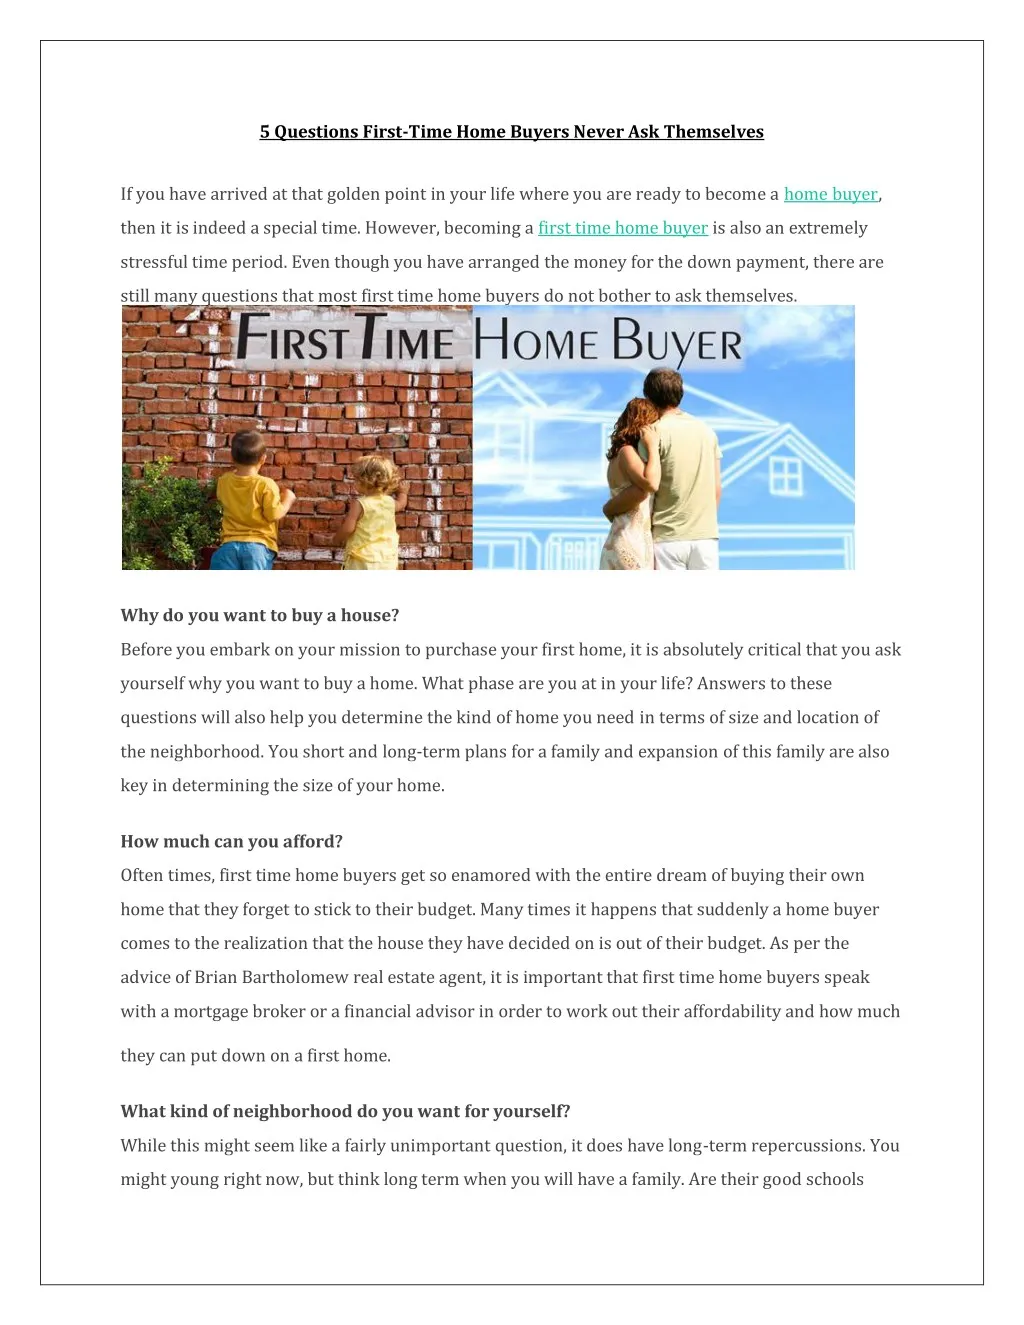 5 questions first time home buyers never